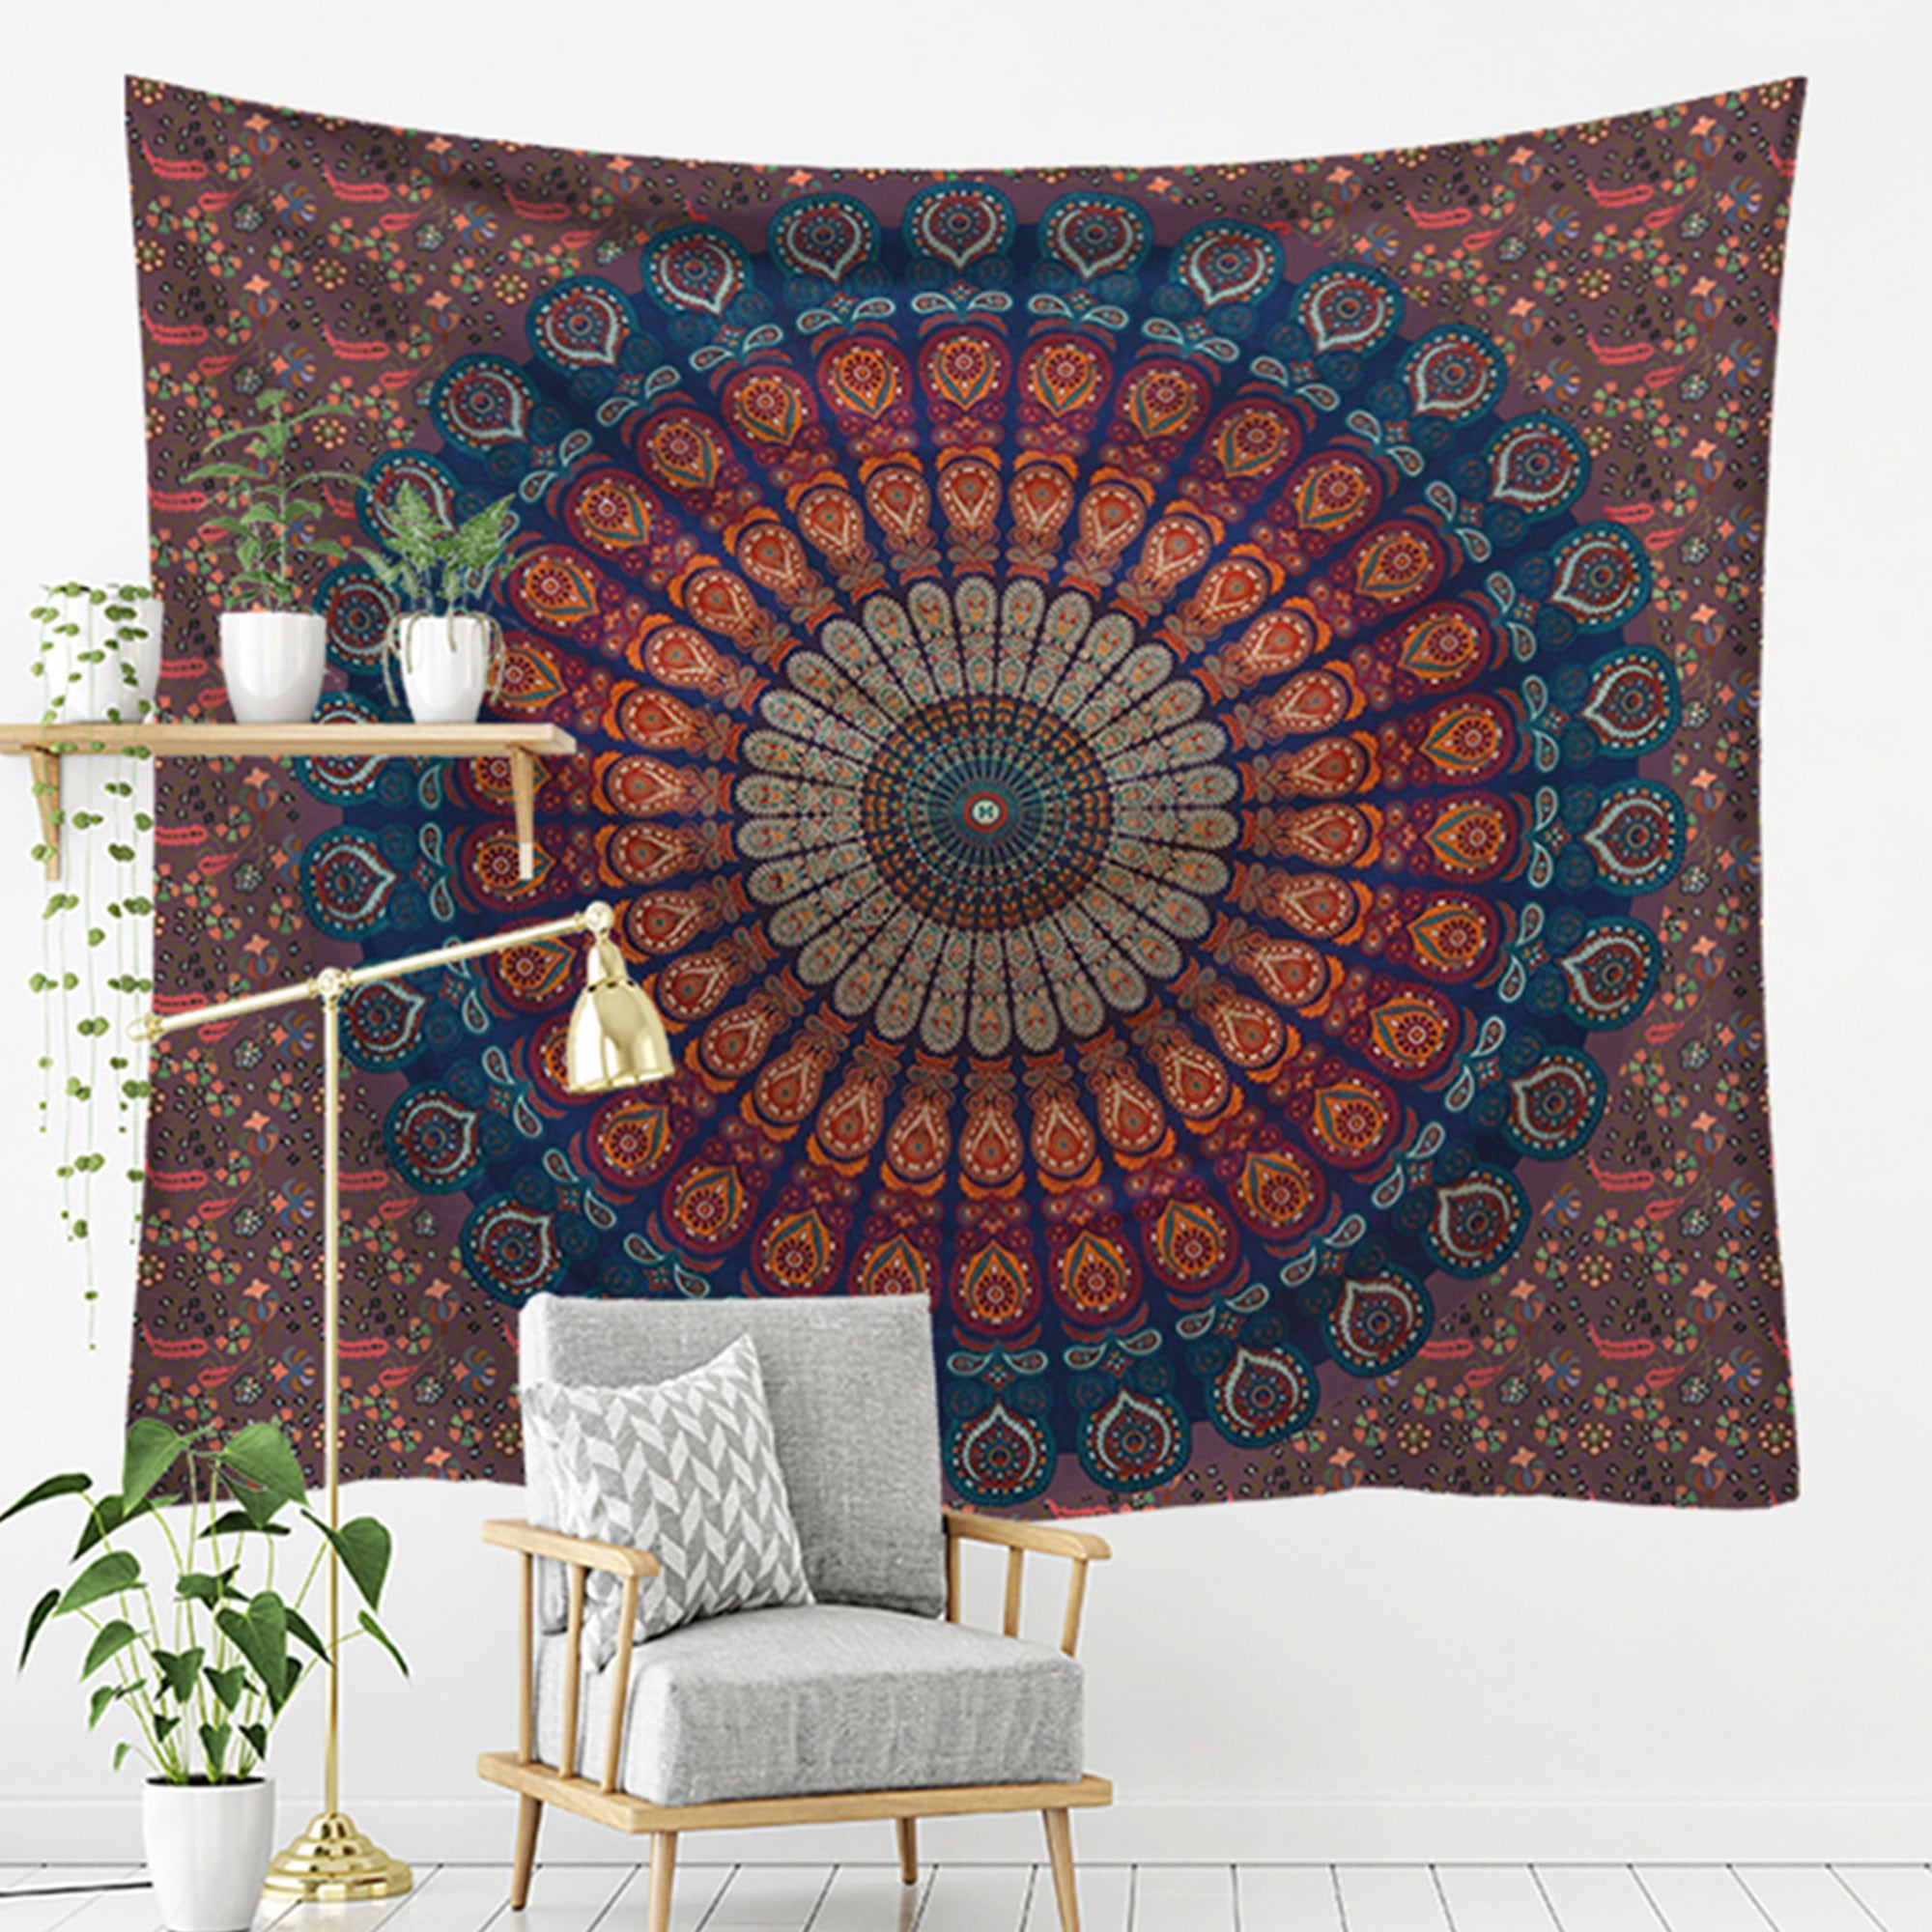 DODOING Indian Tapestry Hippie Bohemian Psychedelic Peacock Mandala